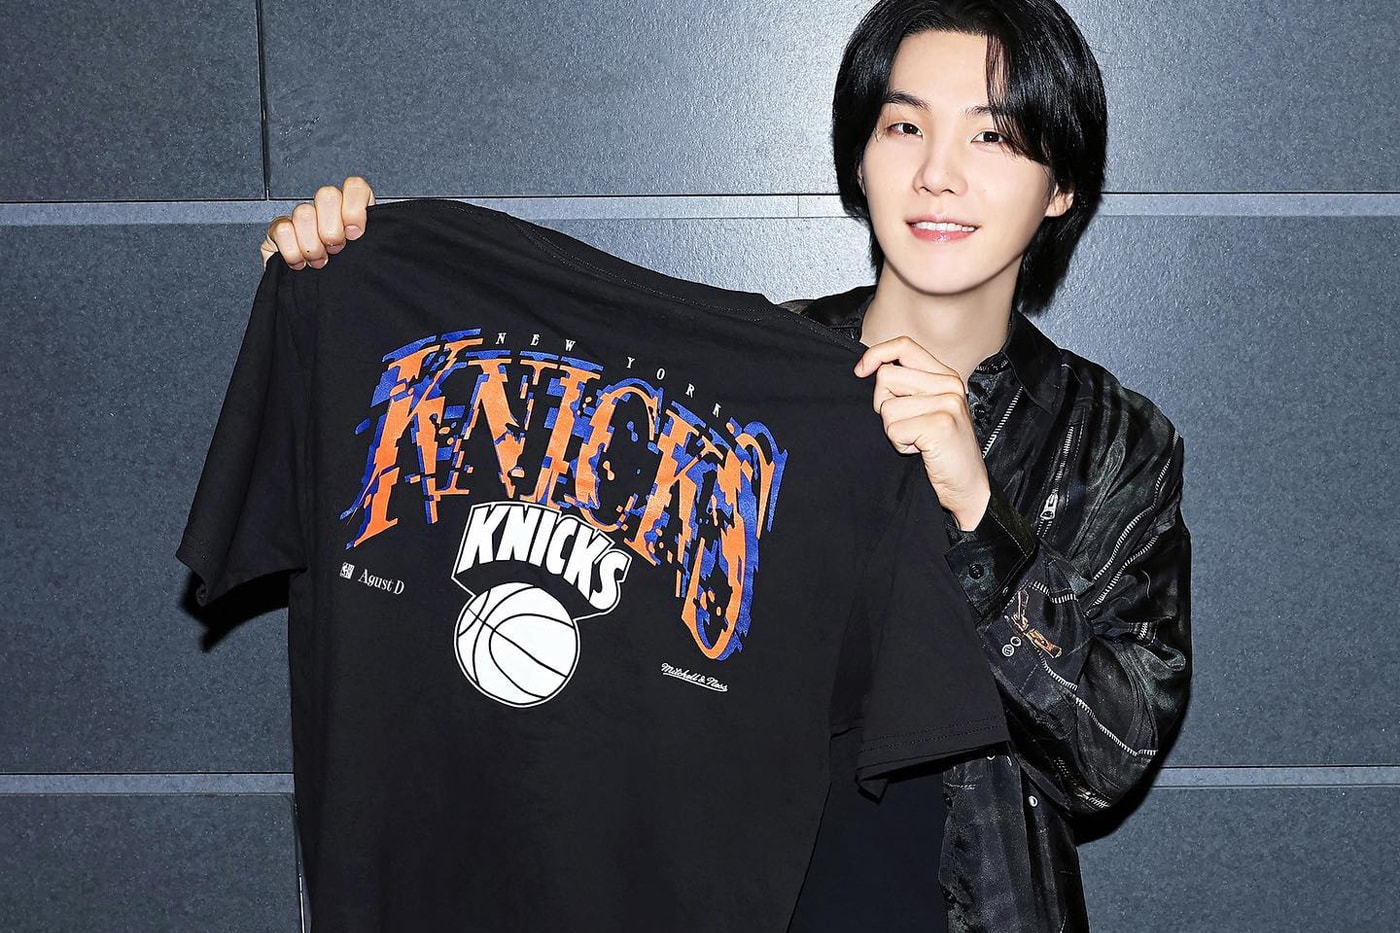 NBA のアンバサダーを務める BTS SUGA がミッチェル & ネスとのコラボレーションを発表 BTS' Suga Unveils NBA Collaboration with Mitchell & Ness new york knics k-pop star t shirts hoodies jackets shorts Chicago Bulls, the Golden State Warriors, the Los Angeles Clippers, the Los Angeles Lakers brooklyn nets